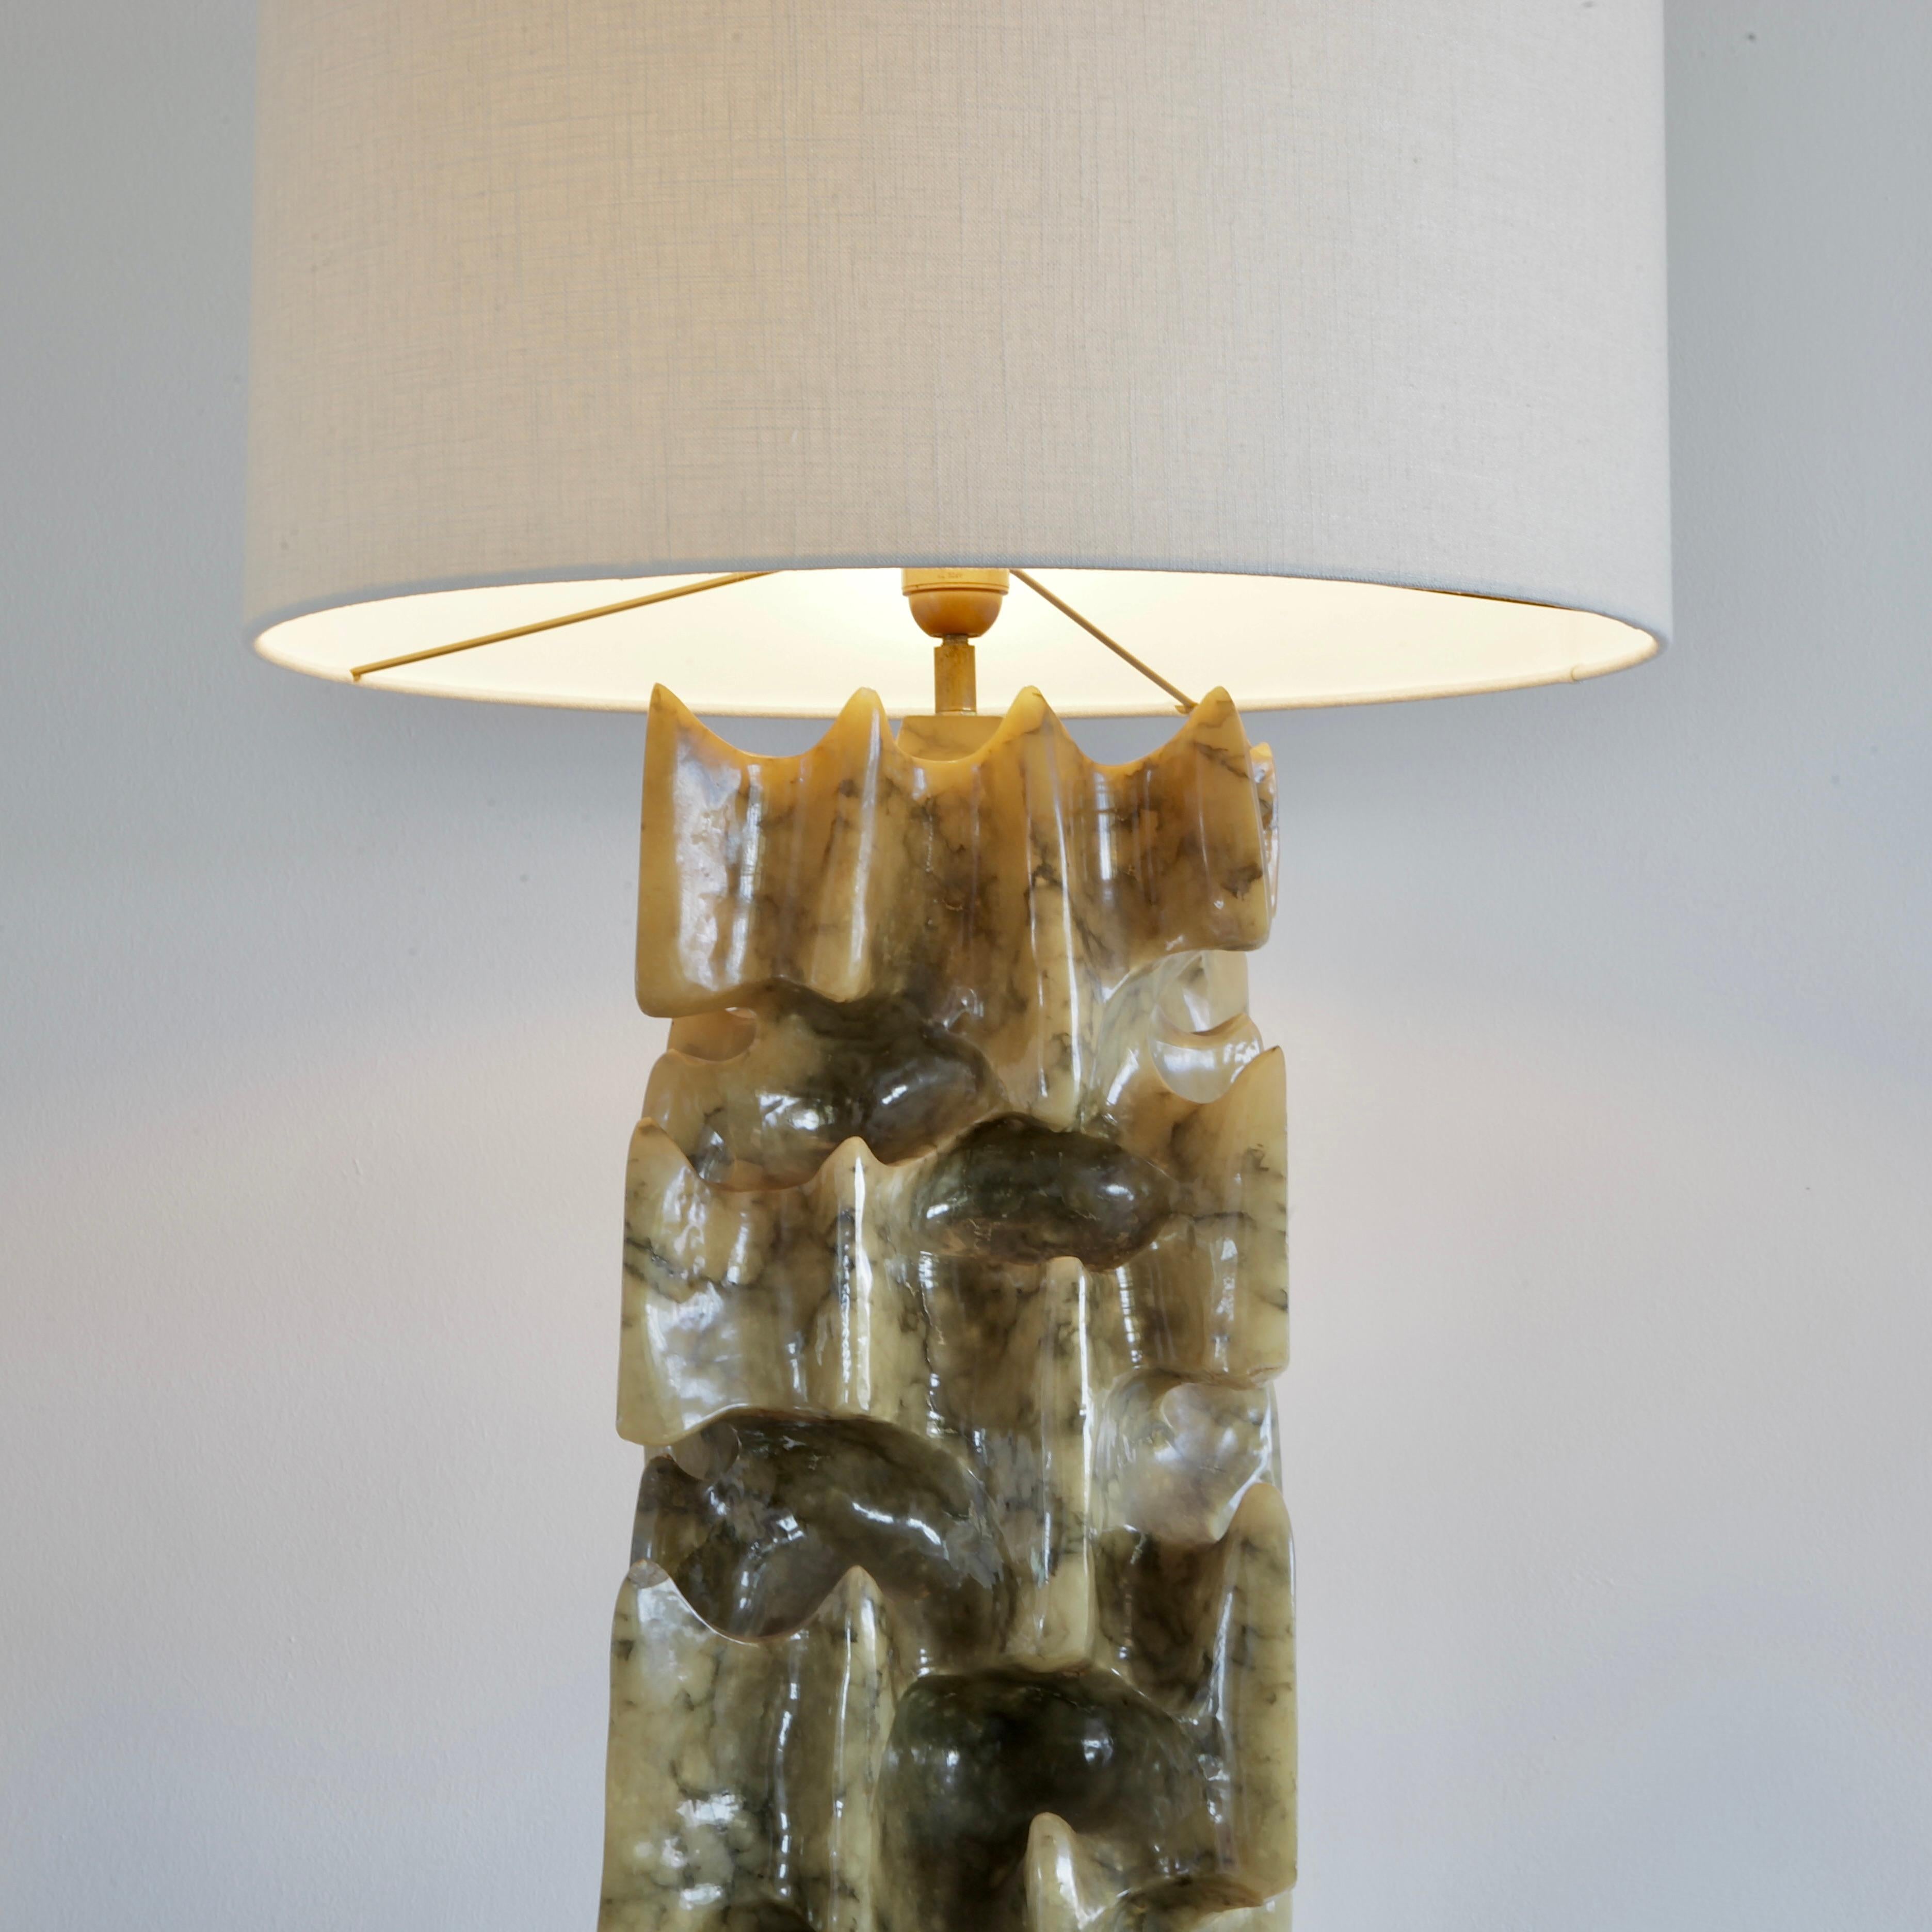 Hand-Carved Unique Large Carved Alabaster Table Lamp, 1960s/1970s, Italy